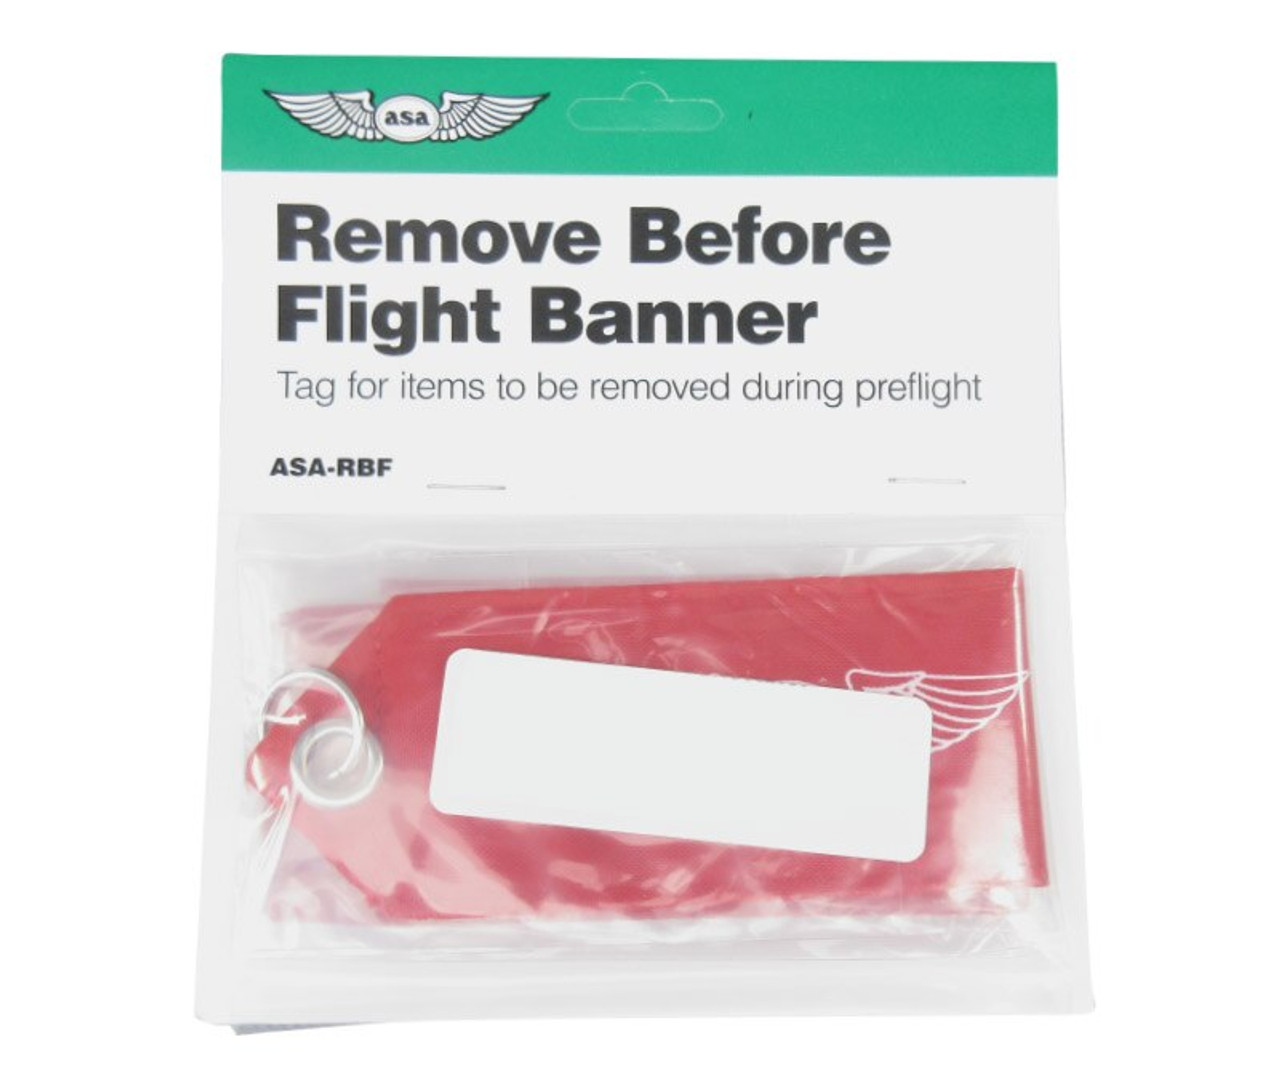 Remove Before Flight Tags - Qty. 50